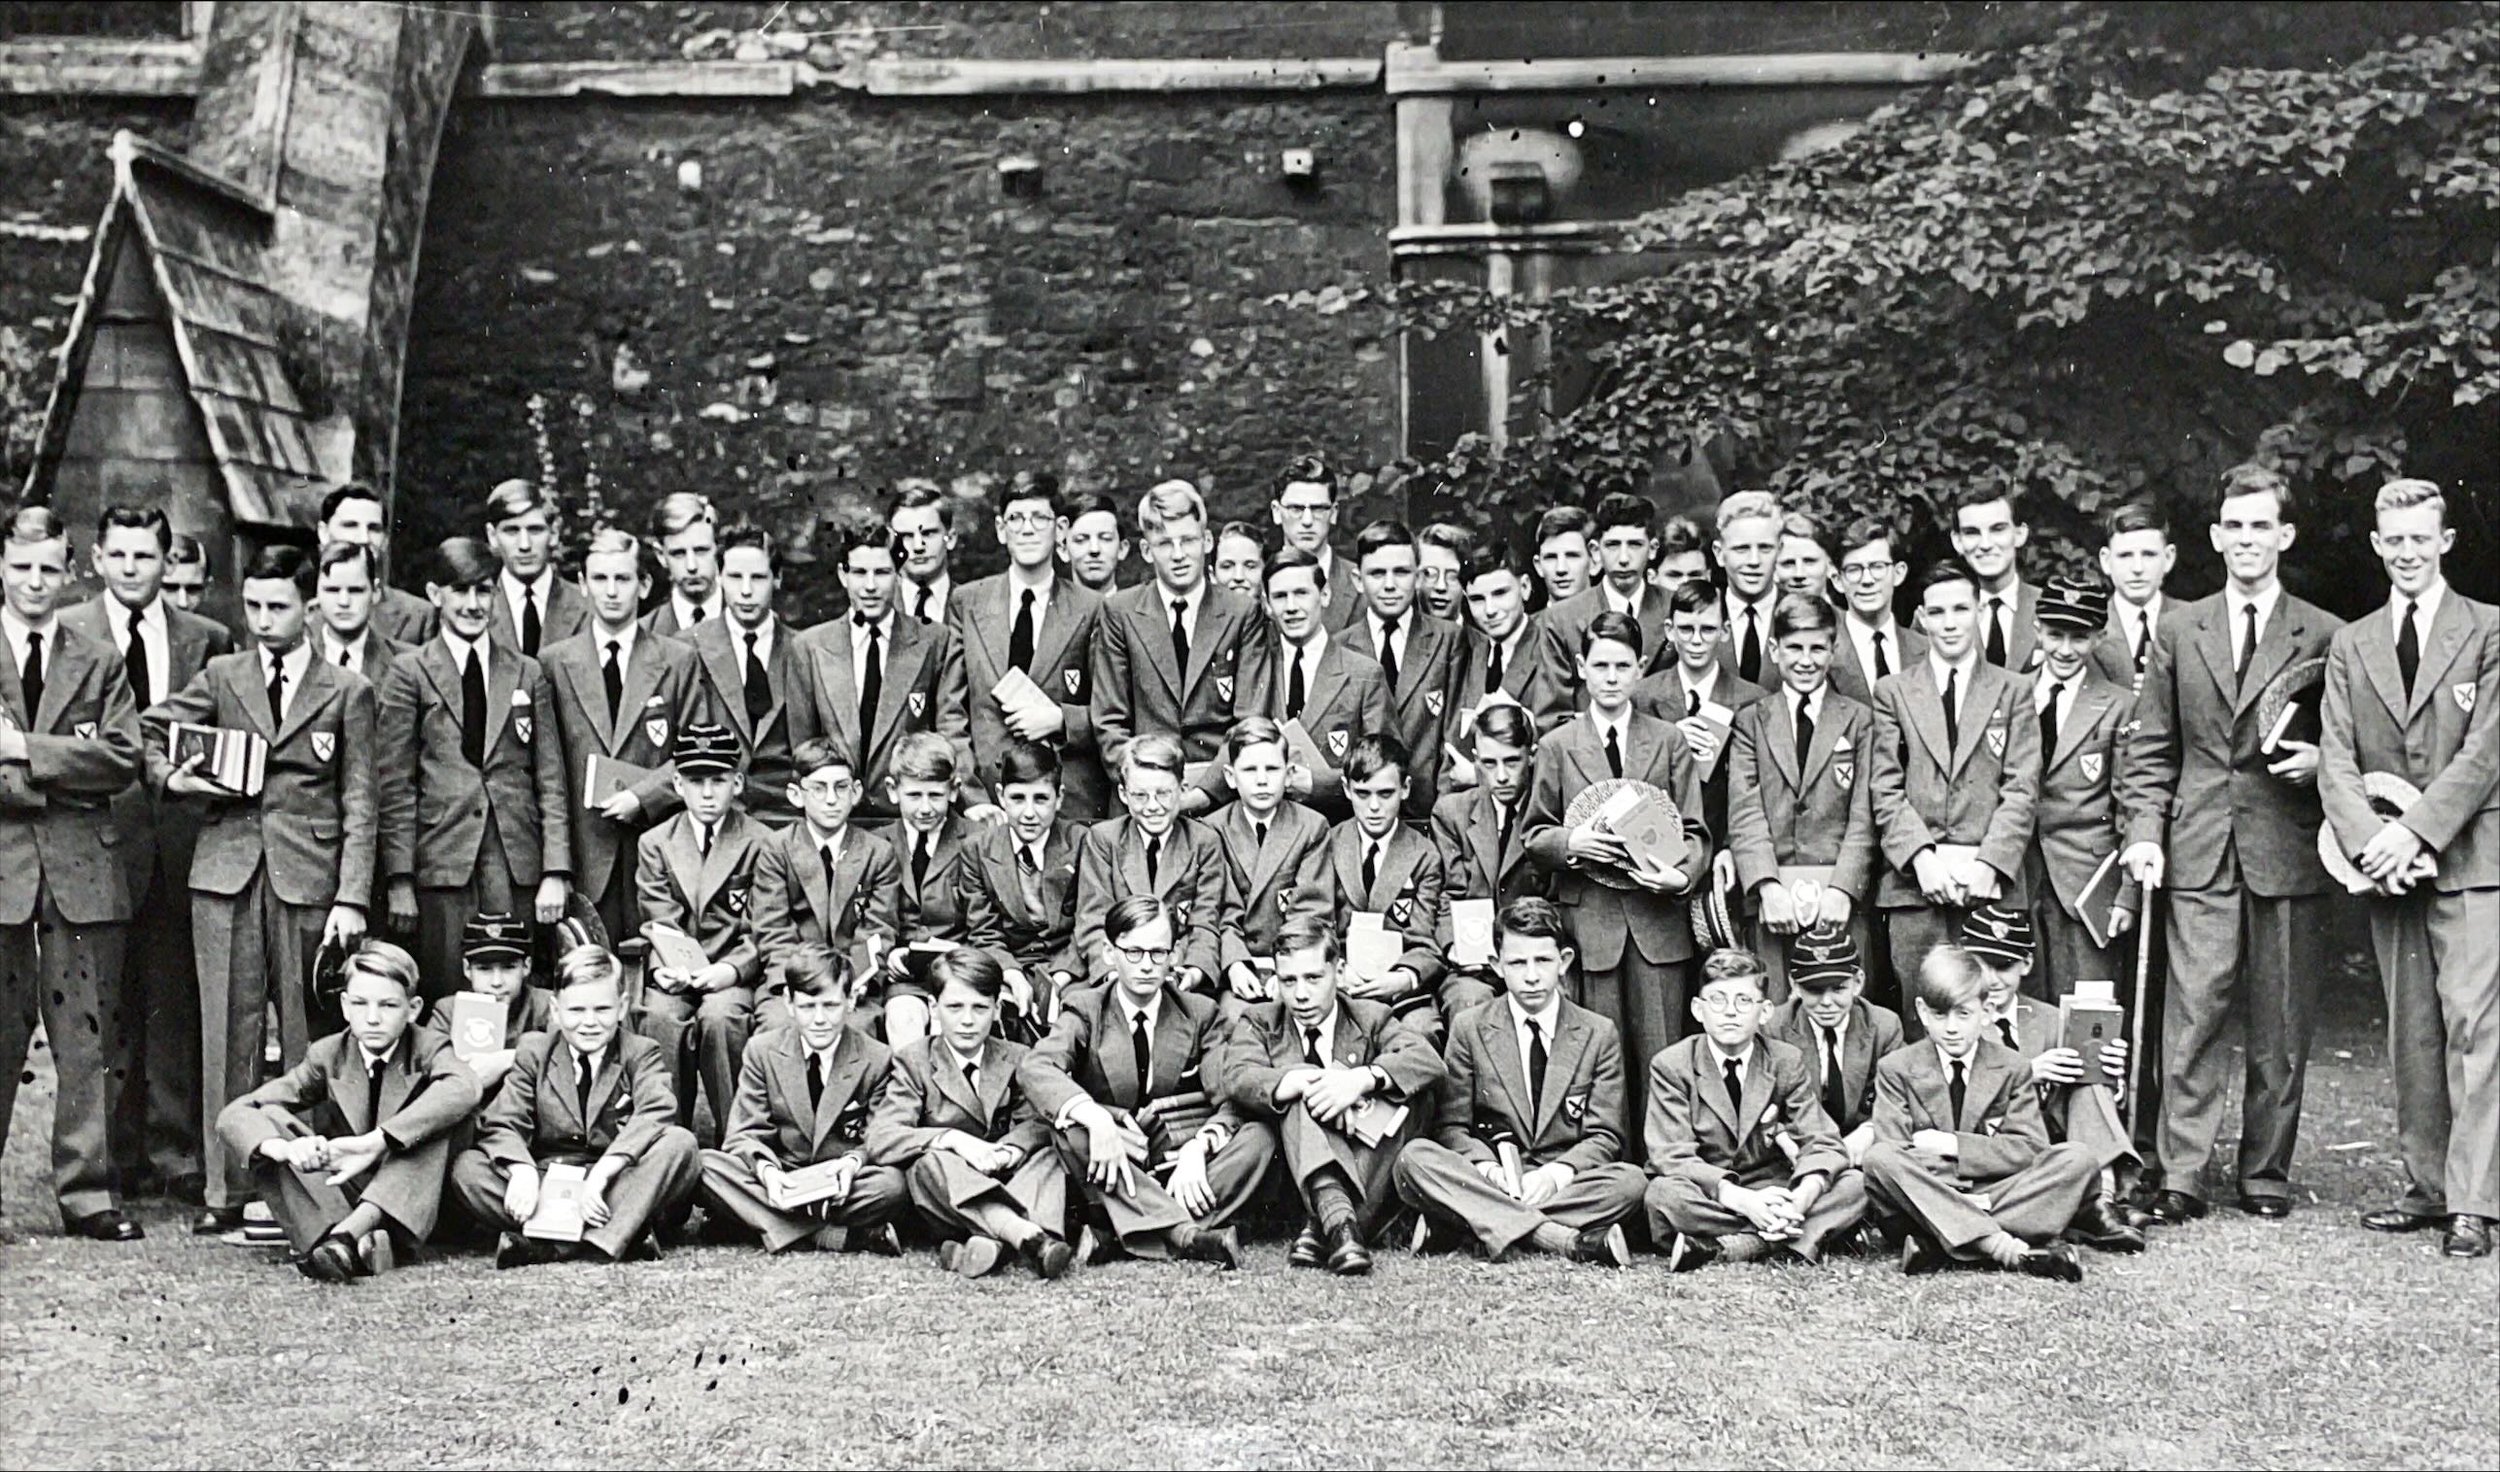 Pupils of King's School who recieved awards on Speech Day, July 1957